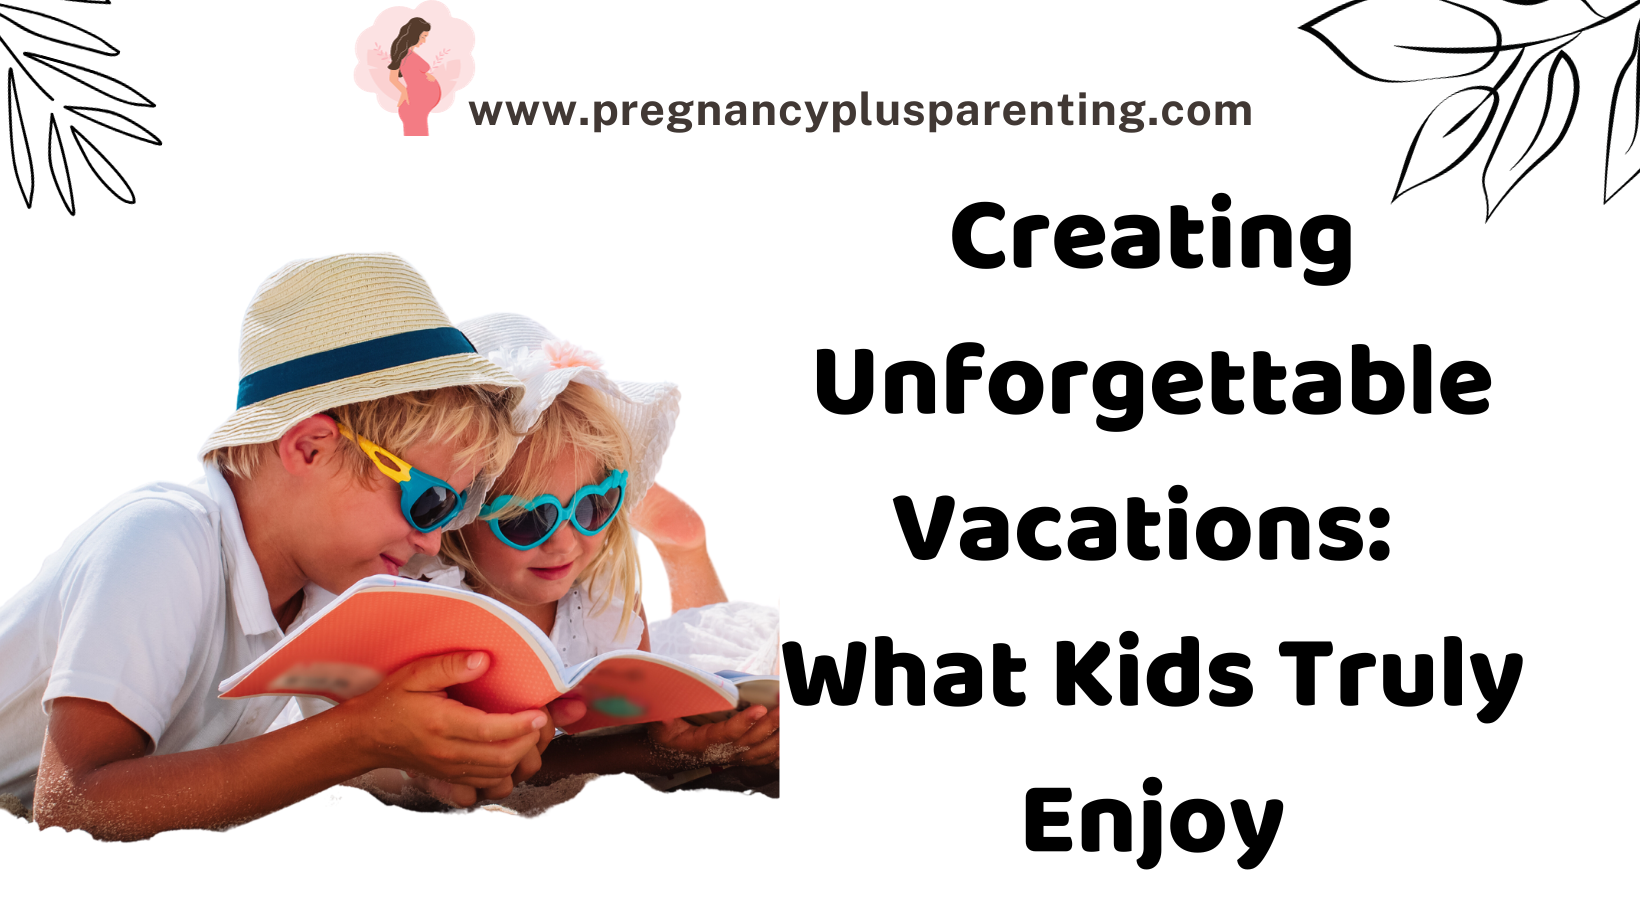 Creating Unforgettable Vacations: What Kids Truly Enjoy